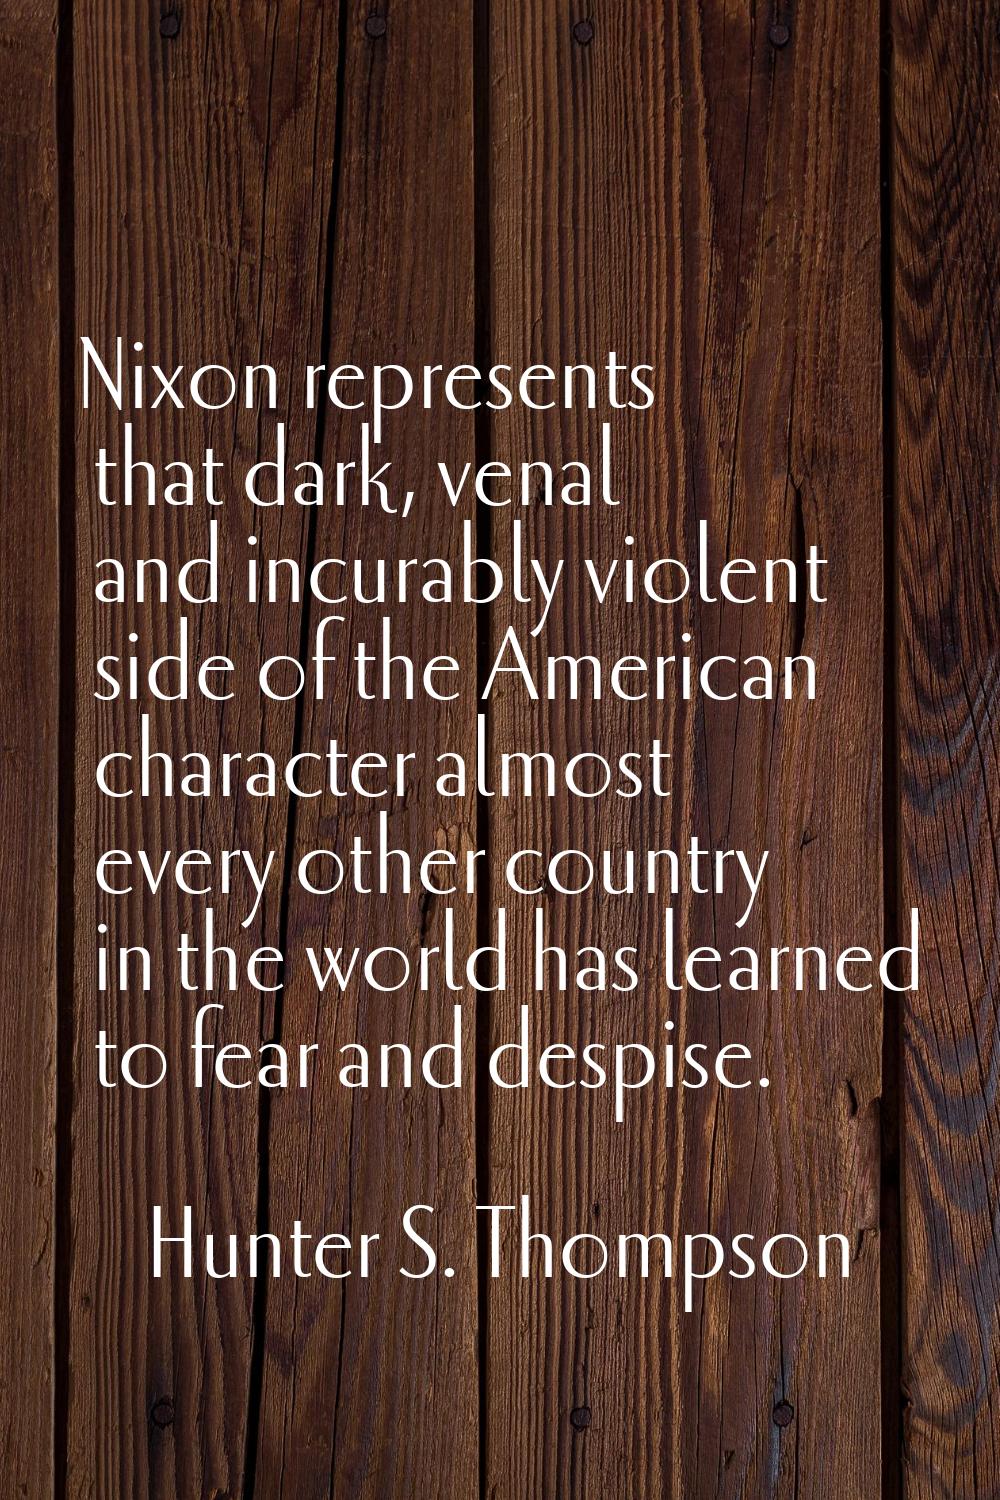 Nixon represents that dark, venal and incurably violent side of the American character almost every